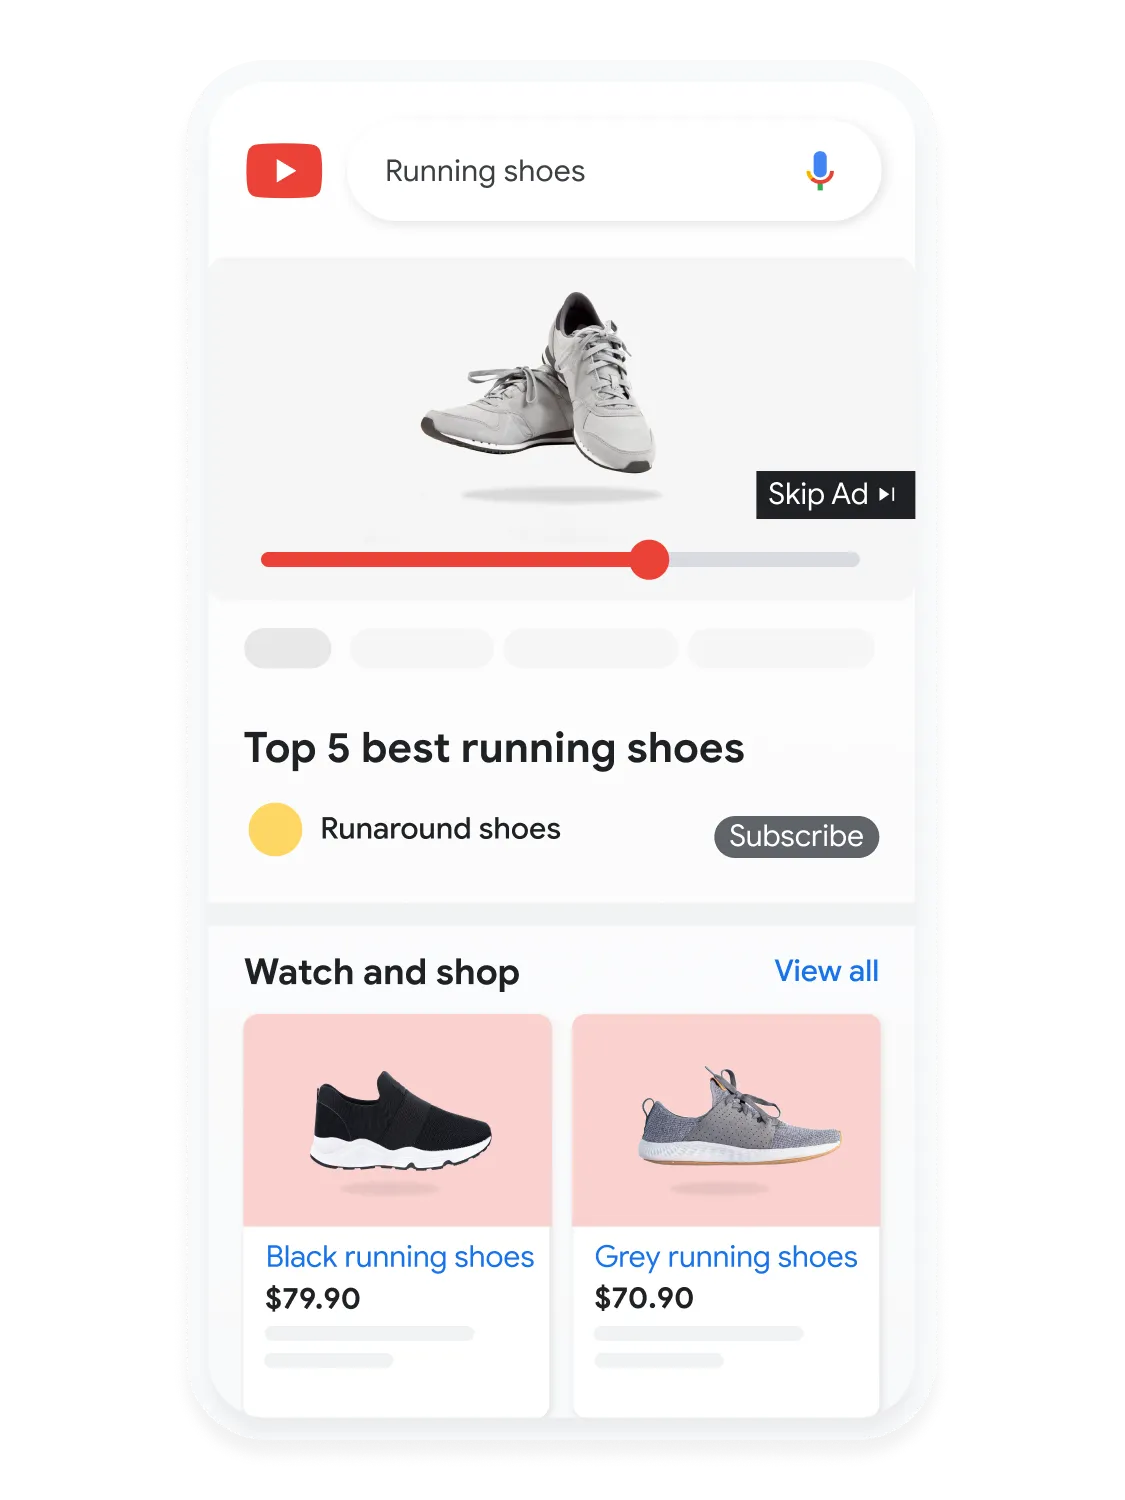 Mobile user interface animated to show a user searching for running shoes on YouTube.